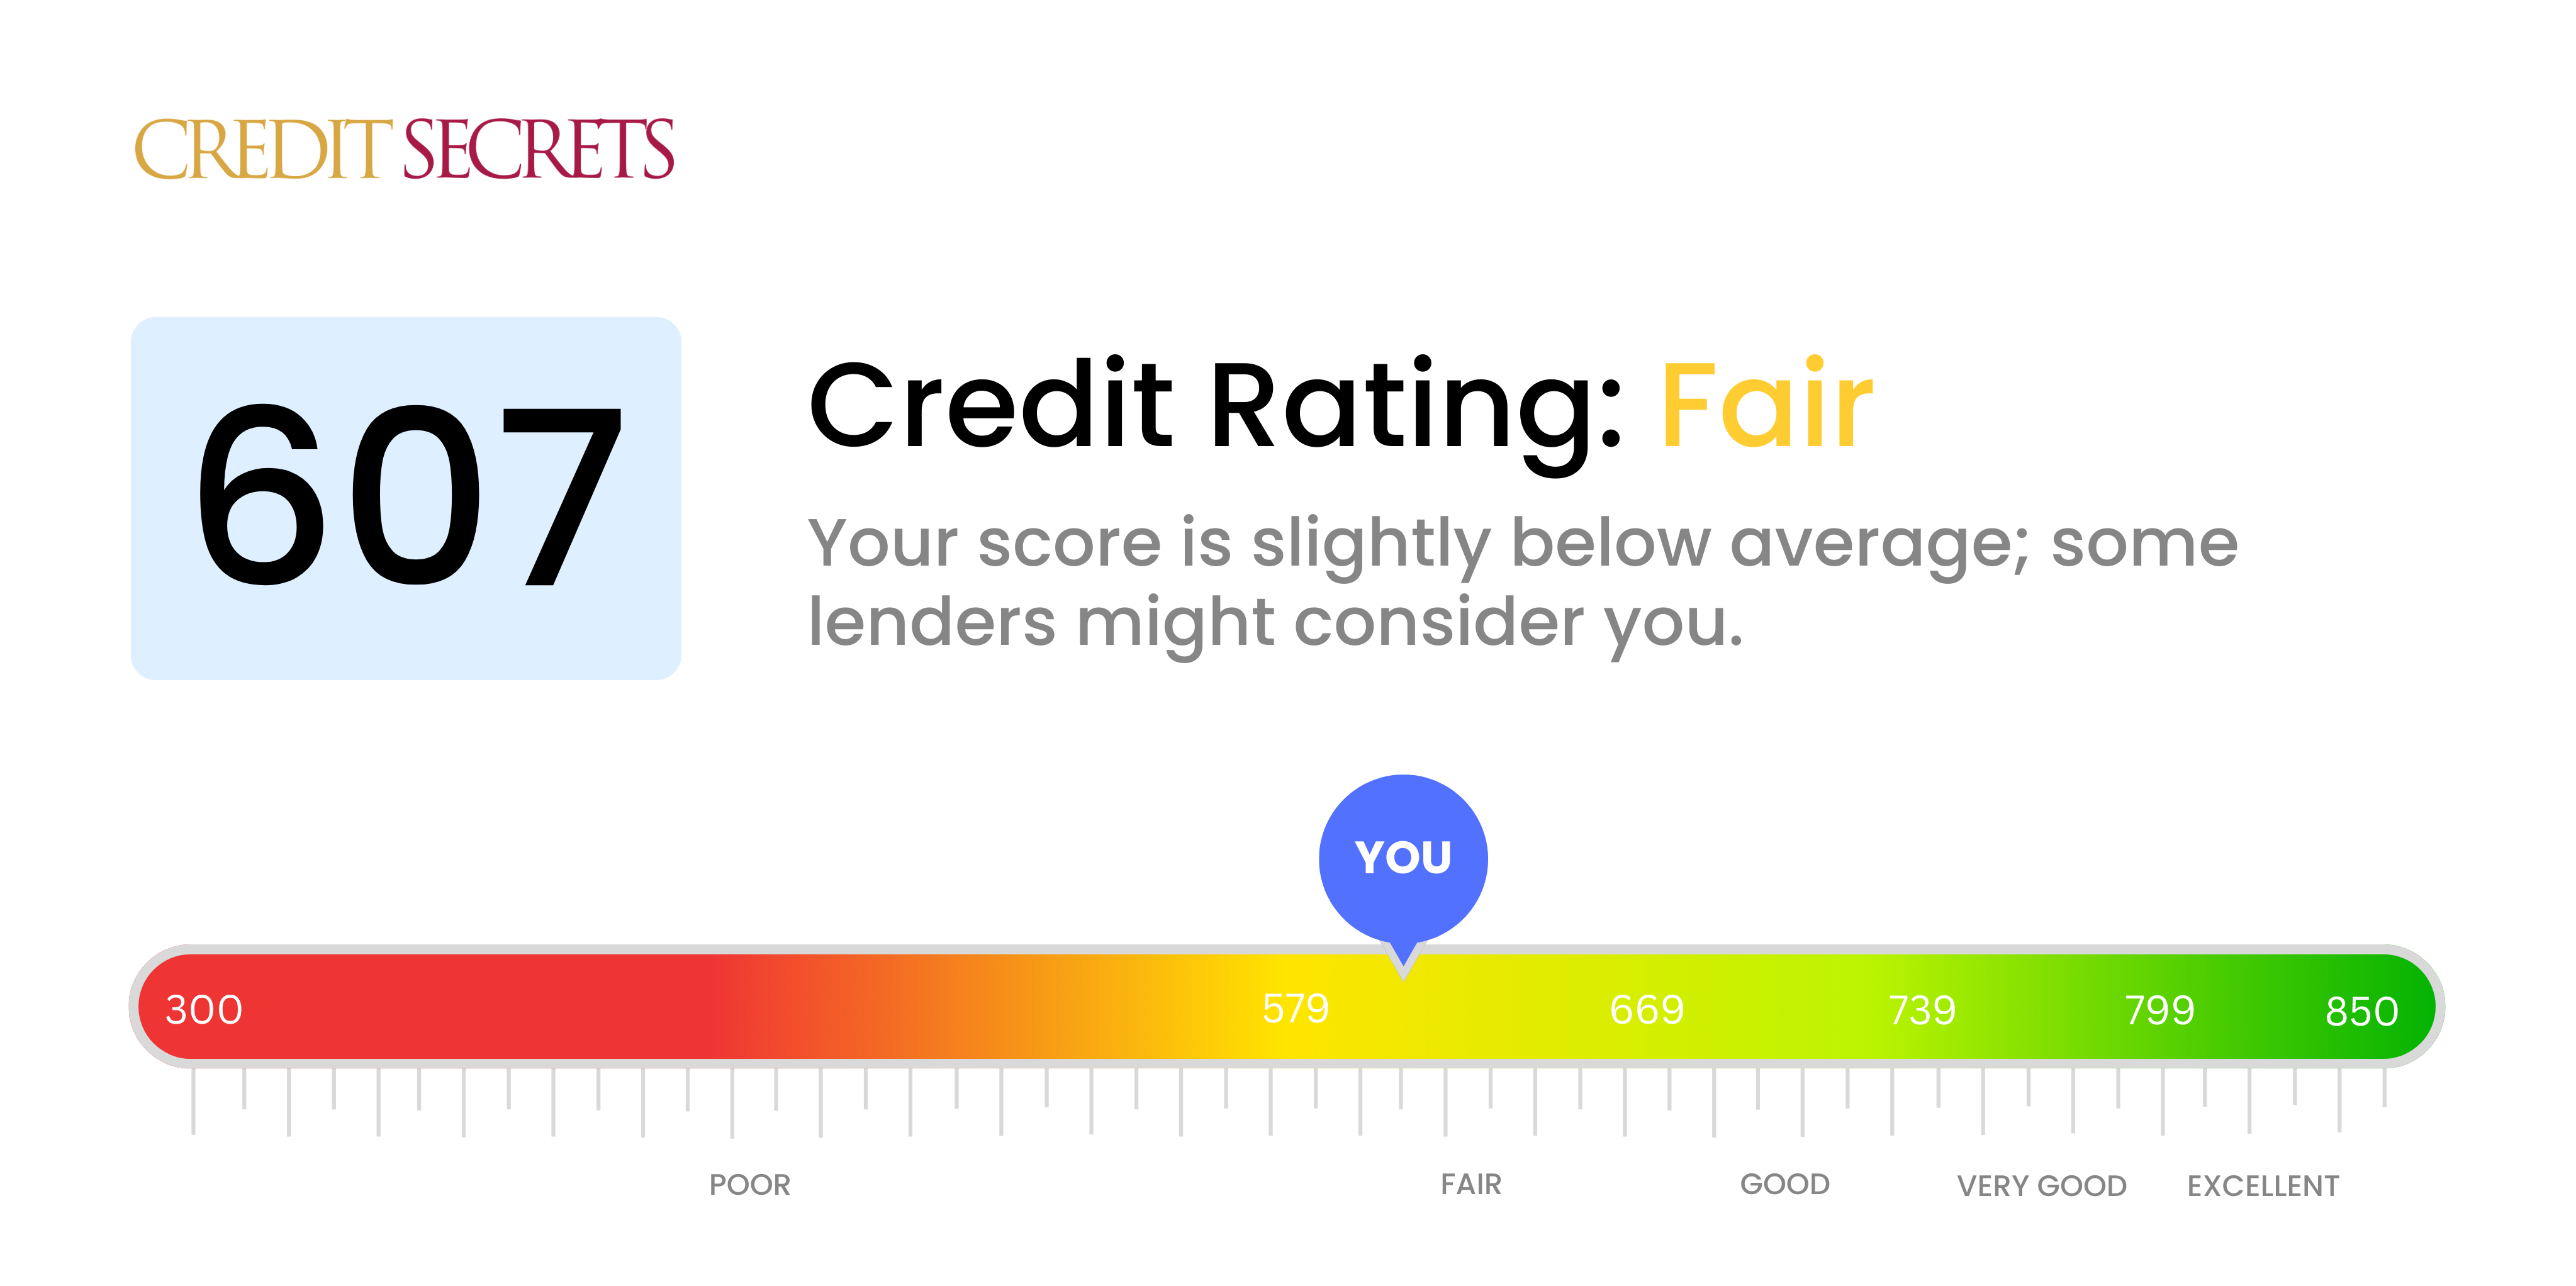 Is 607 a good credit score?